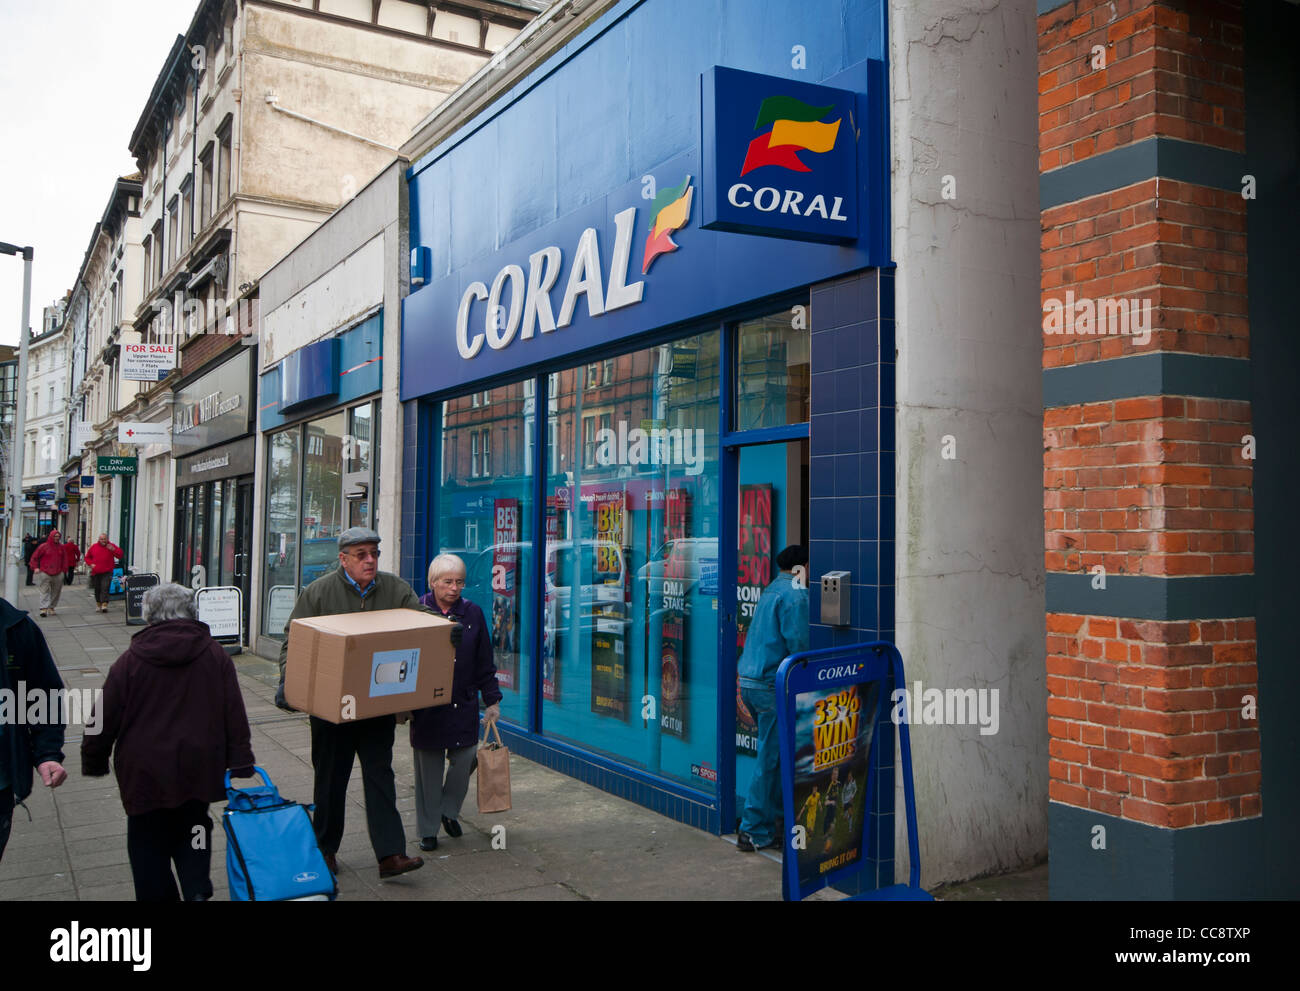 Who Owns Coral Bookmakers